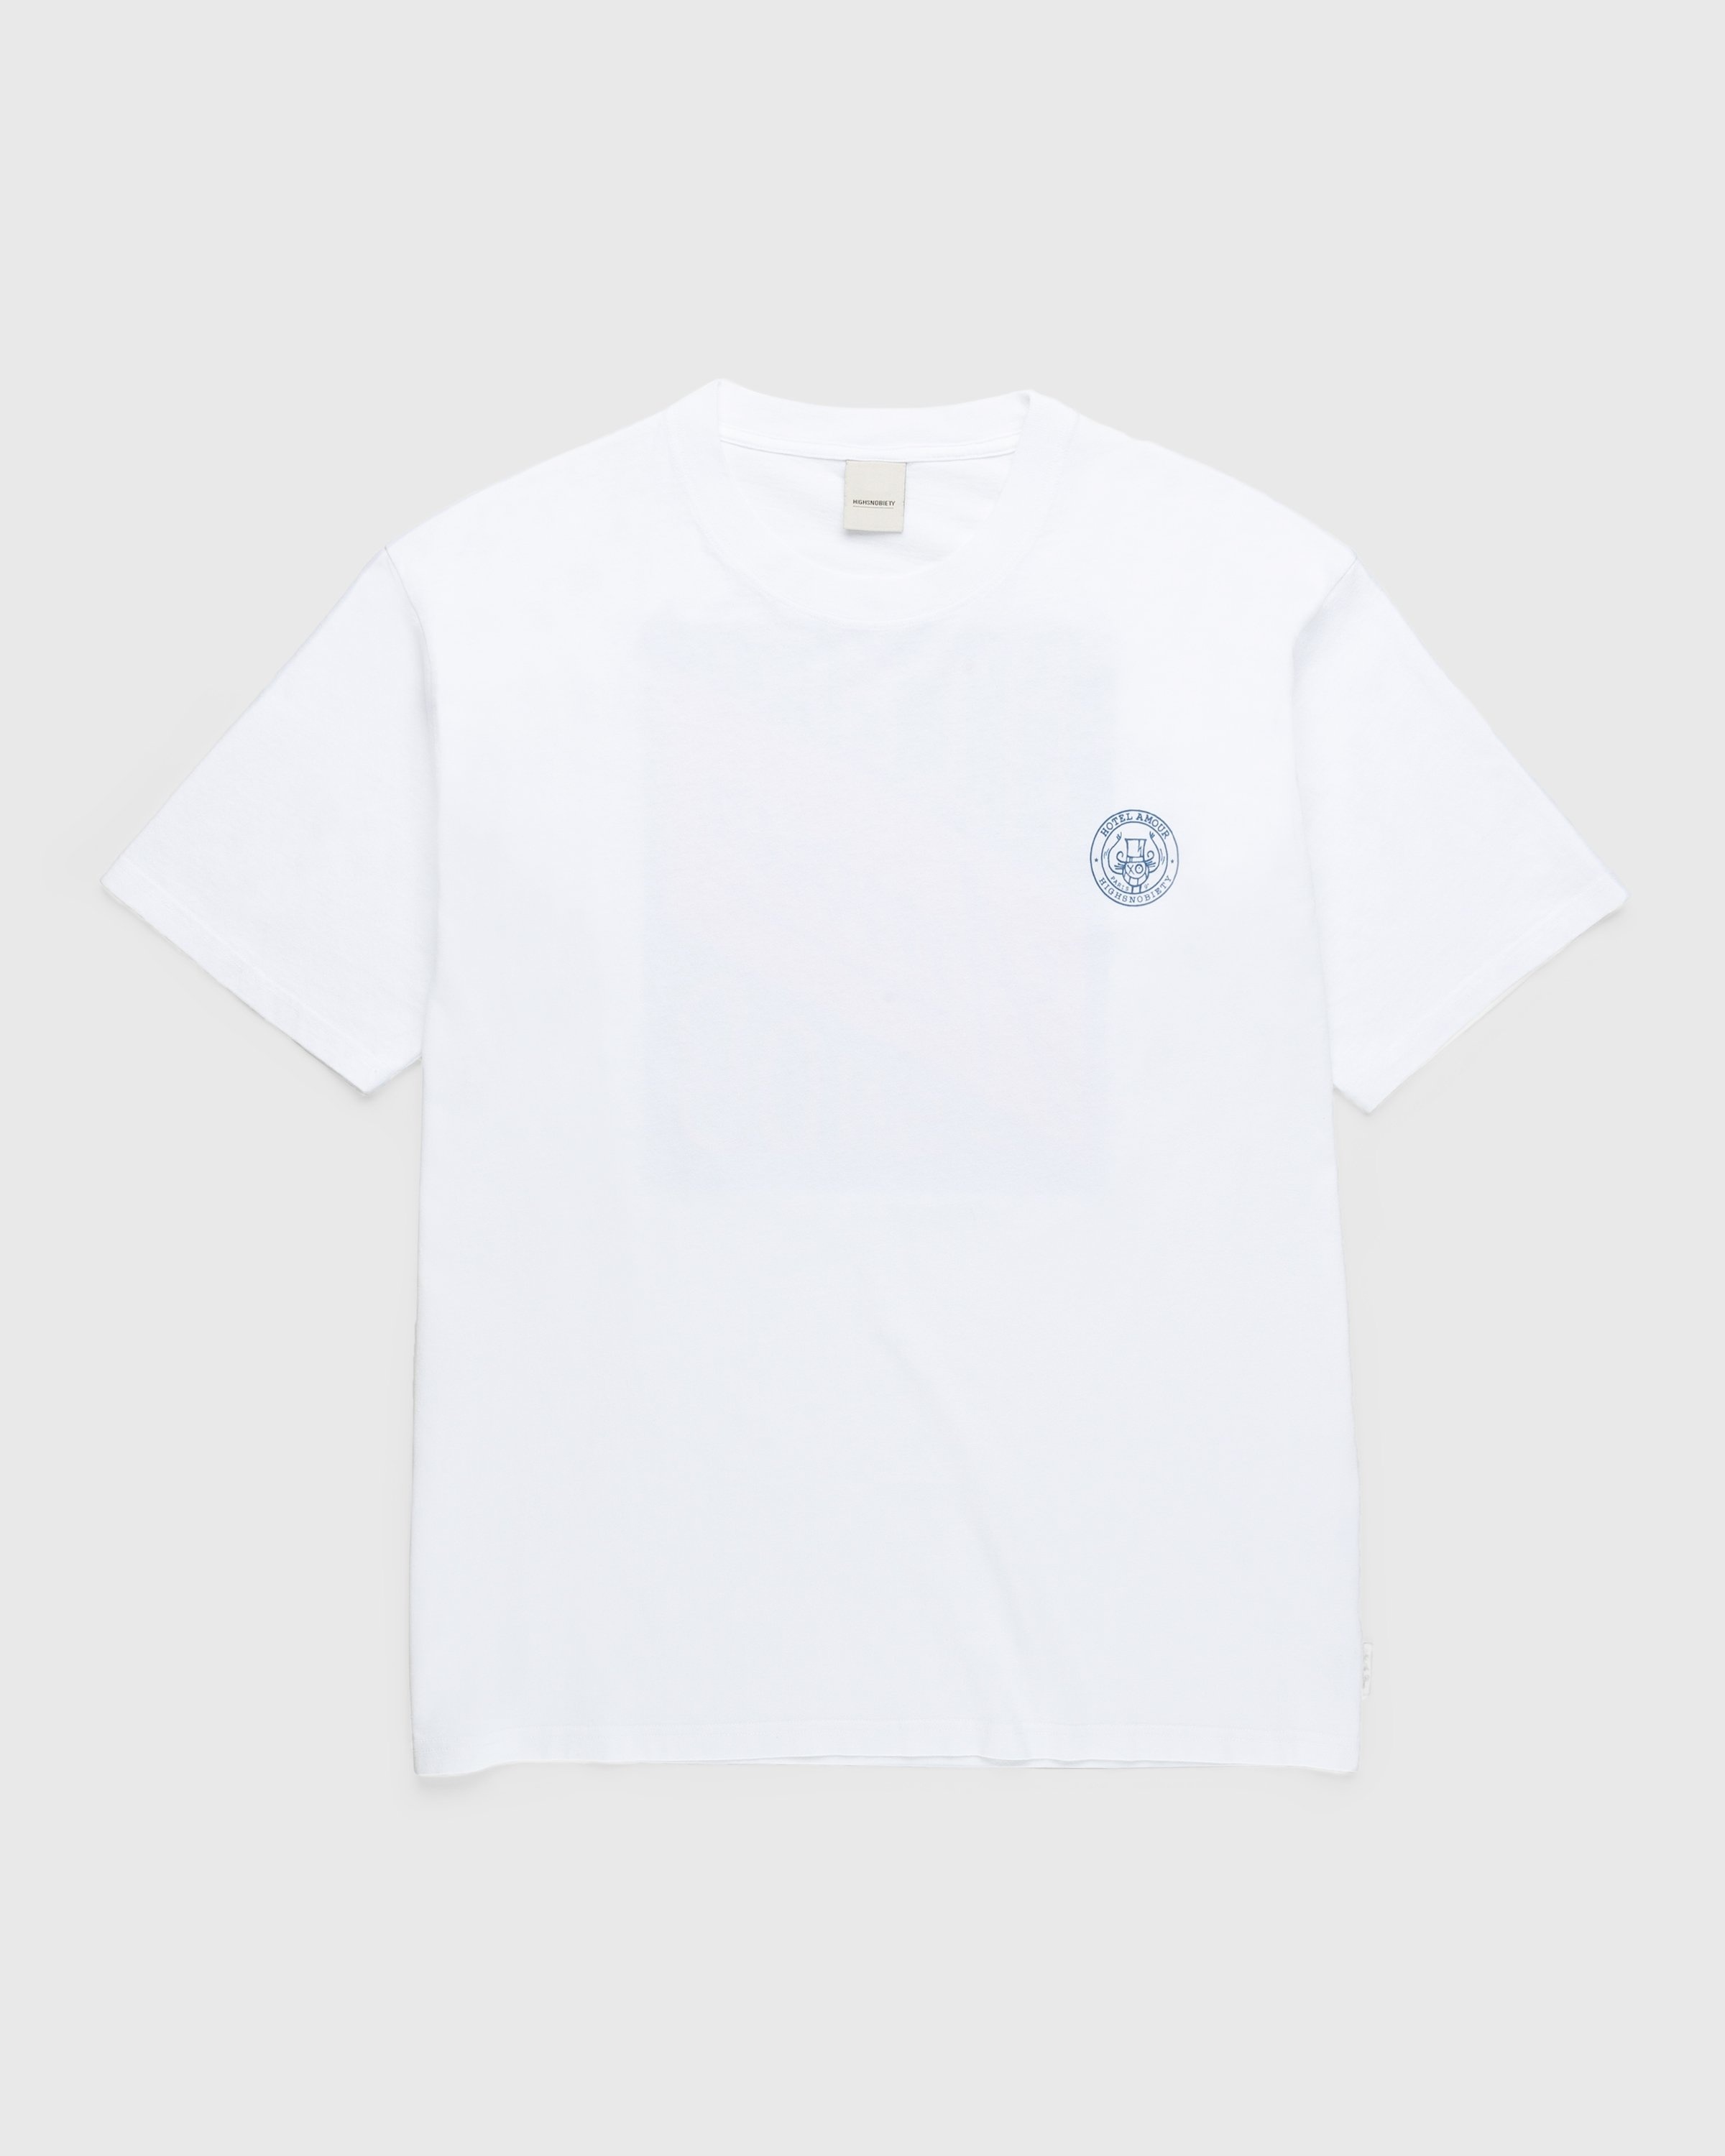 Hotel Amour x Highsnobiety – Not In Paris 4 T-Shirt White - Tops - White - Image 2